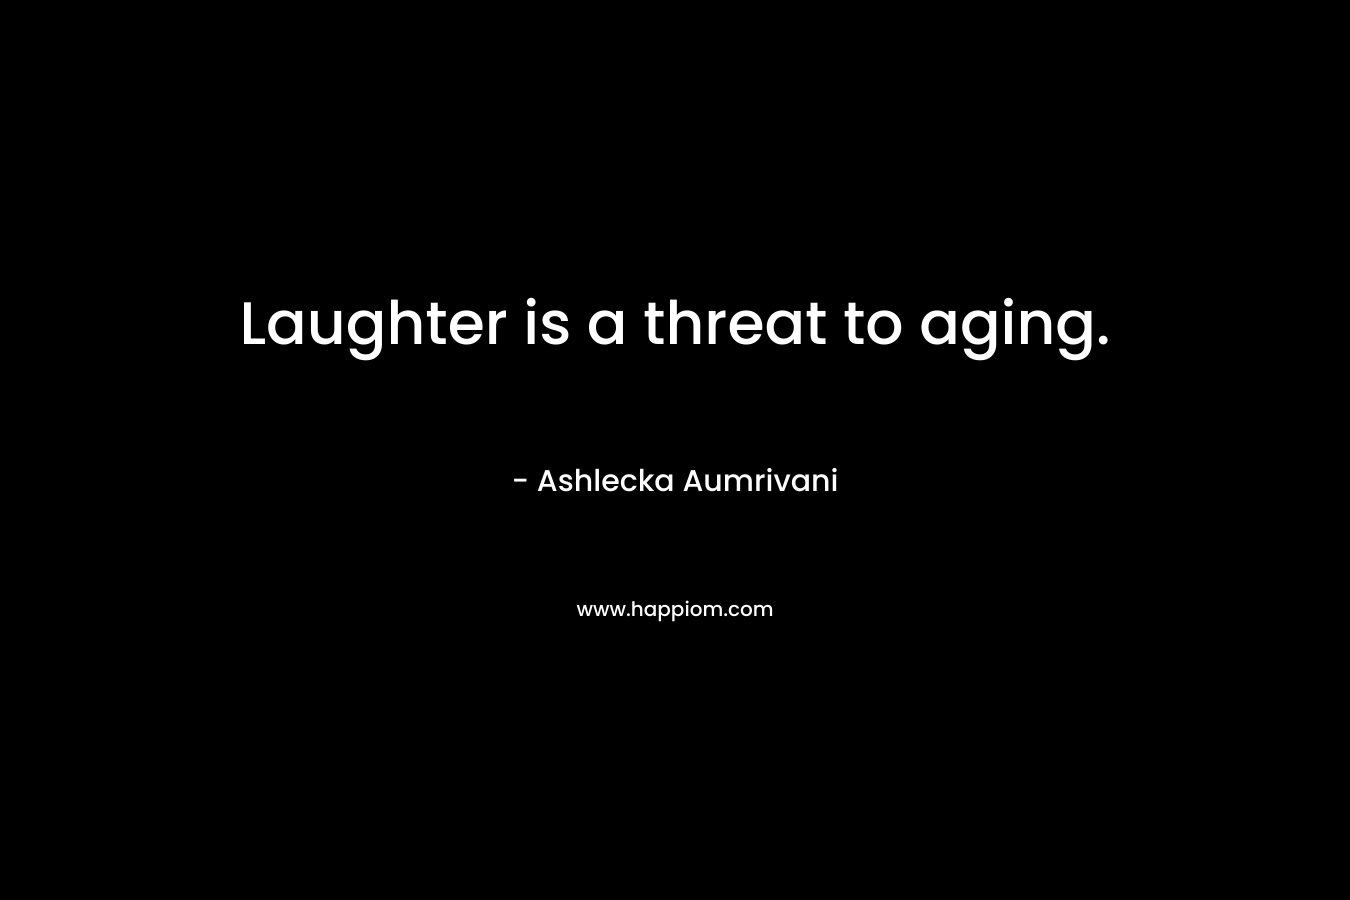 Laughter is a threat to aging.